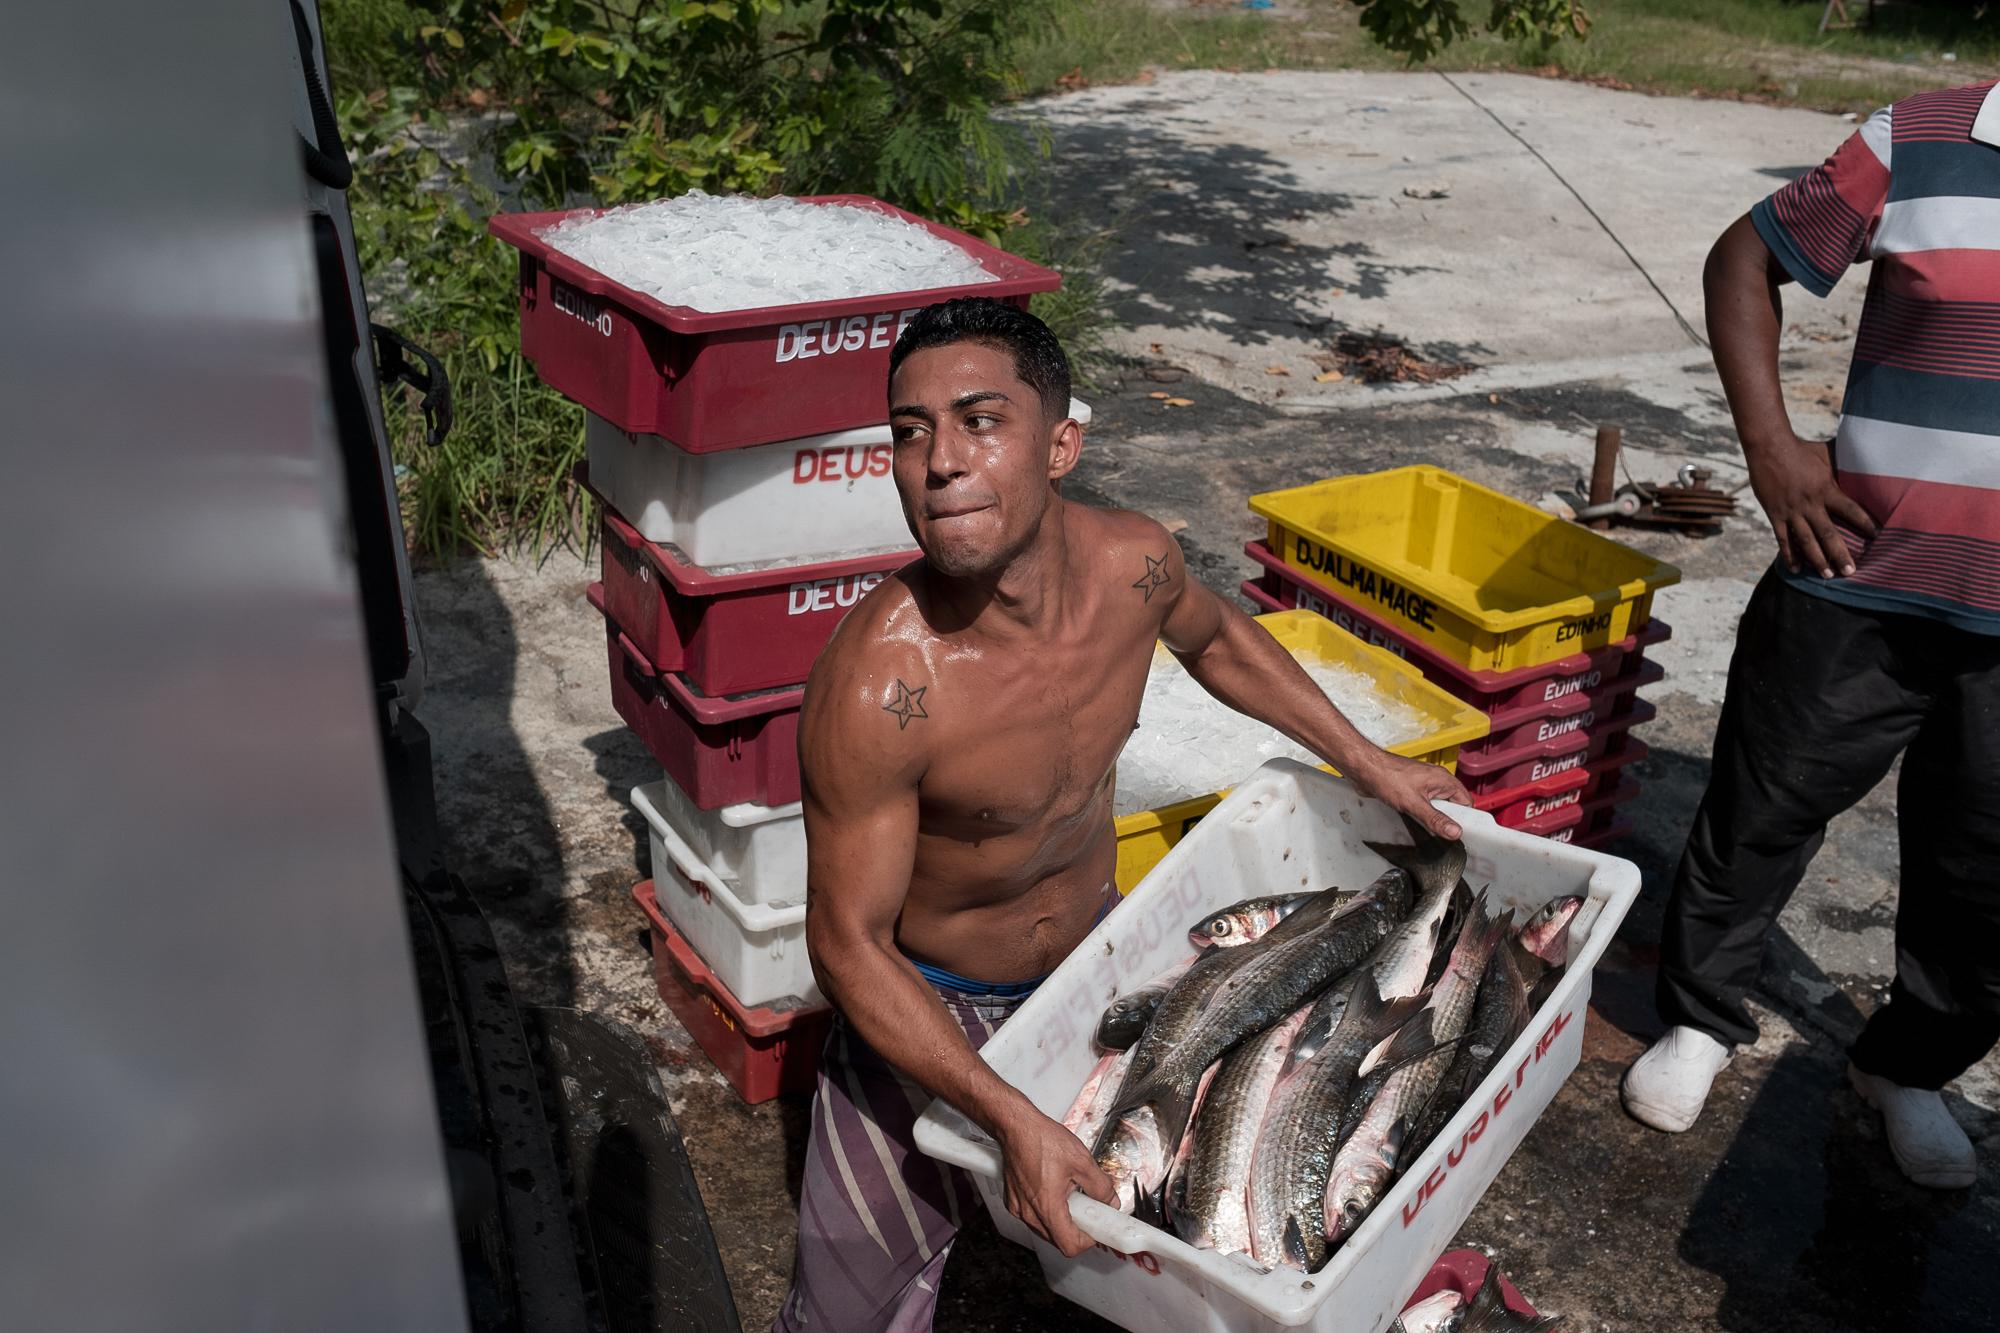 Once sorted and weighed, the fish are taken to markets on an air-conditioned truck. Most...